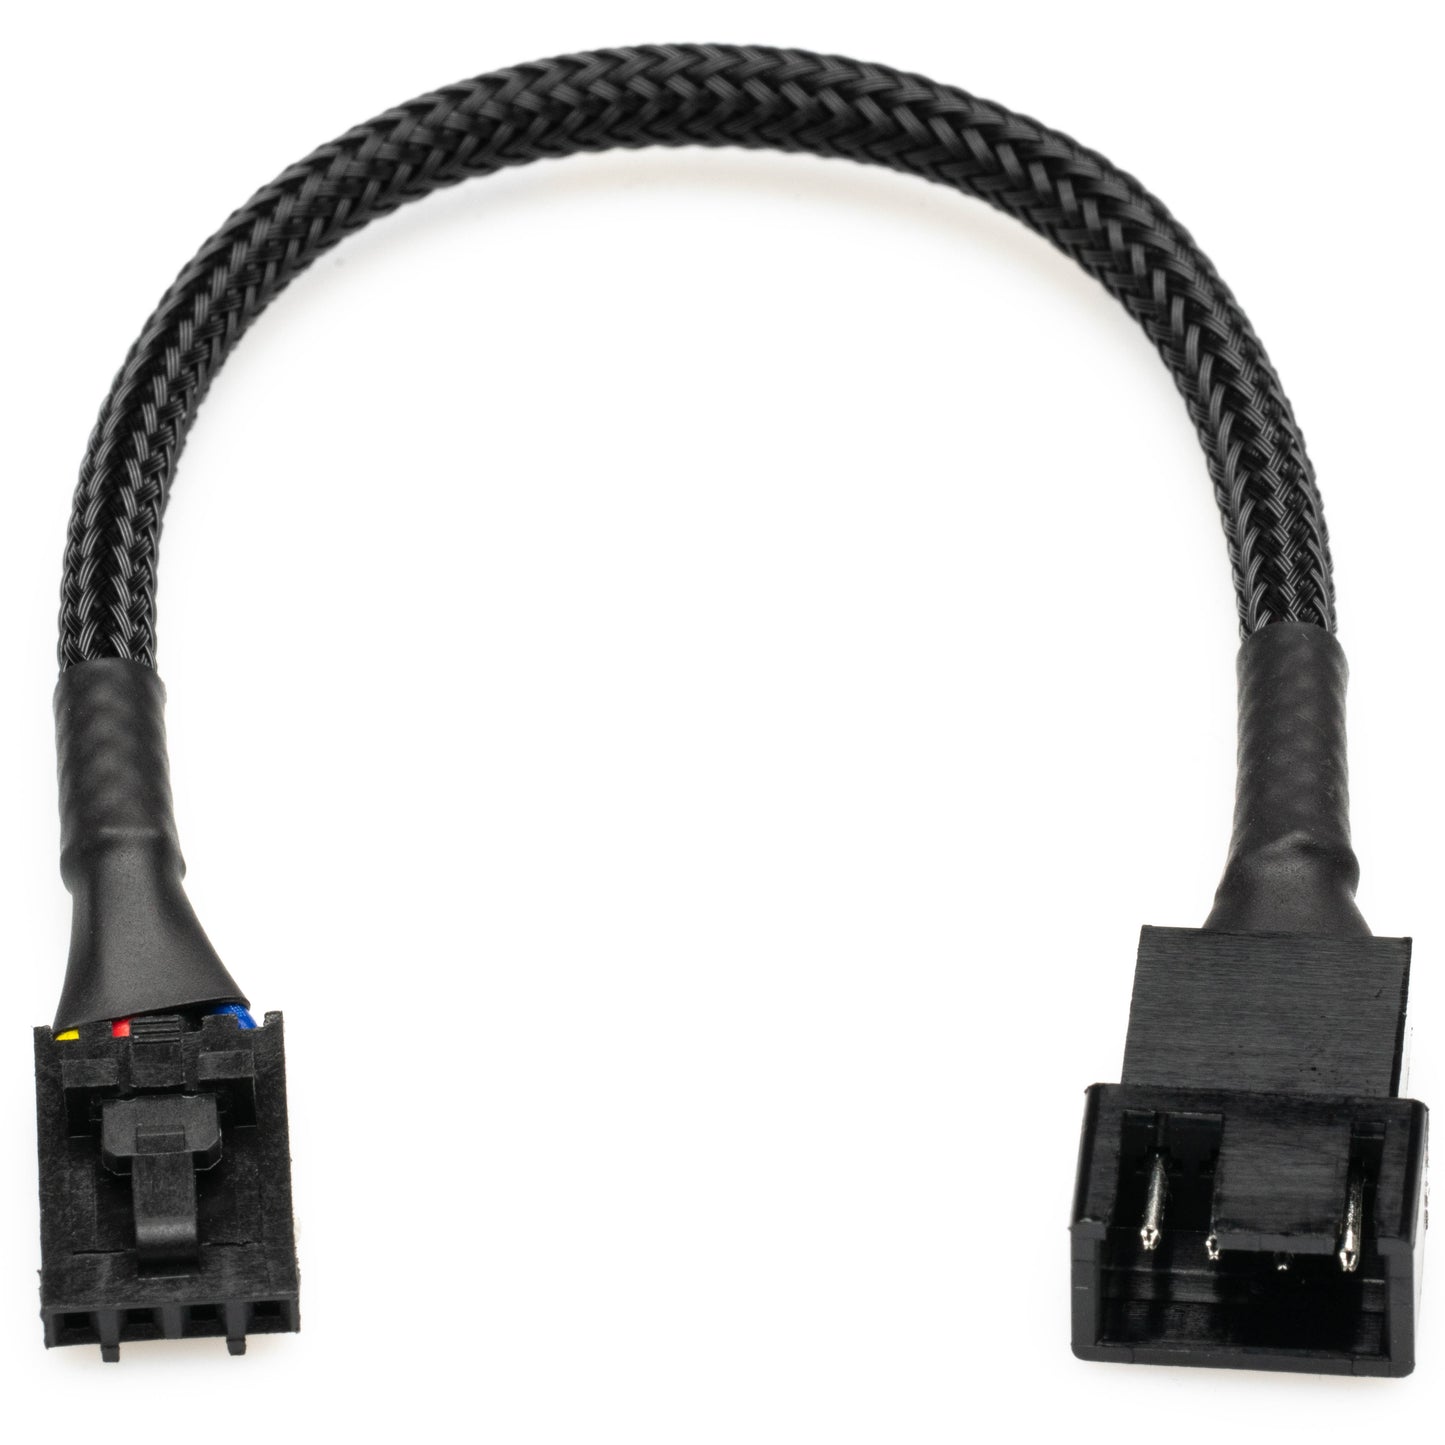 Latching 4-Pin PWM Fan Adapter Cable for Dell Motherboards